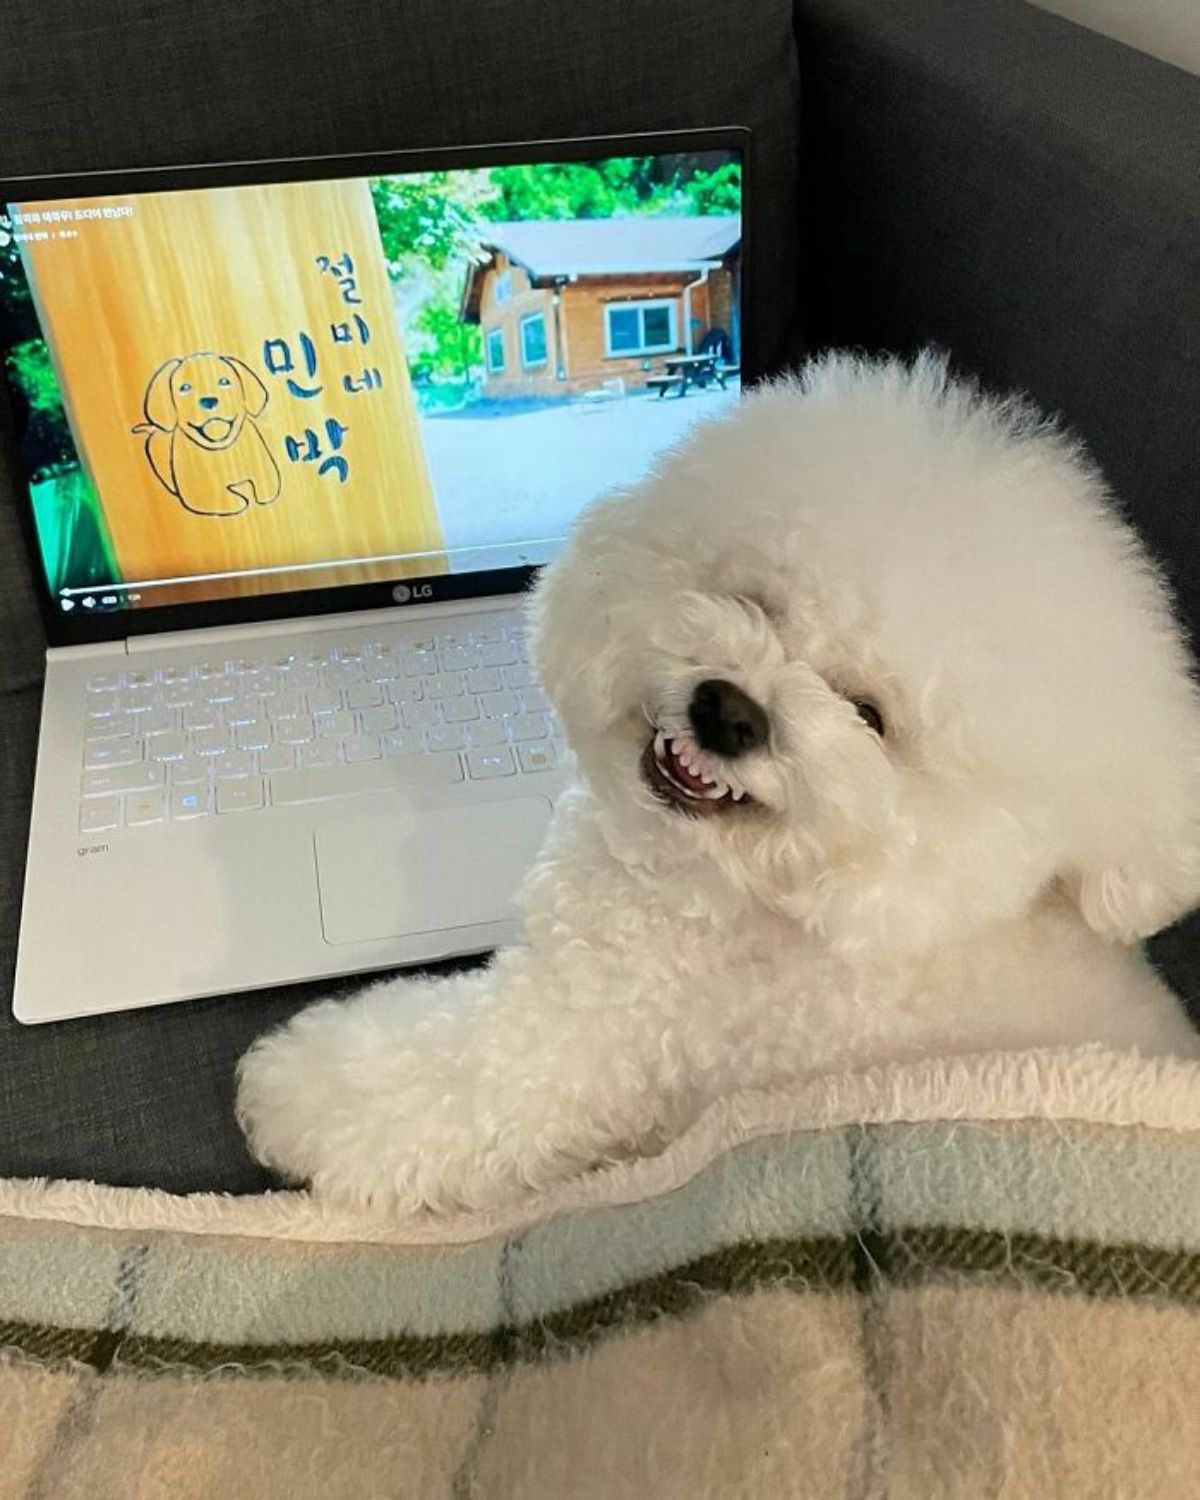 small fluffy white dog growling under a green and white blanket in front of a laptop with a video on